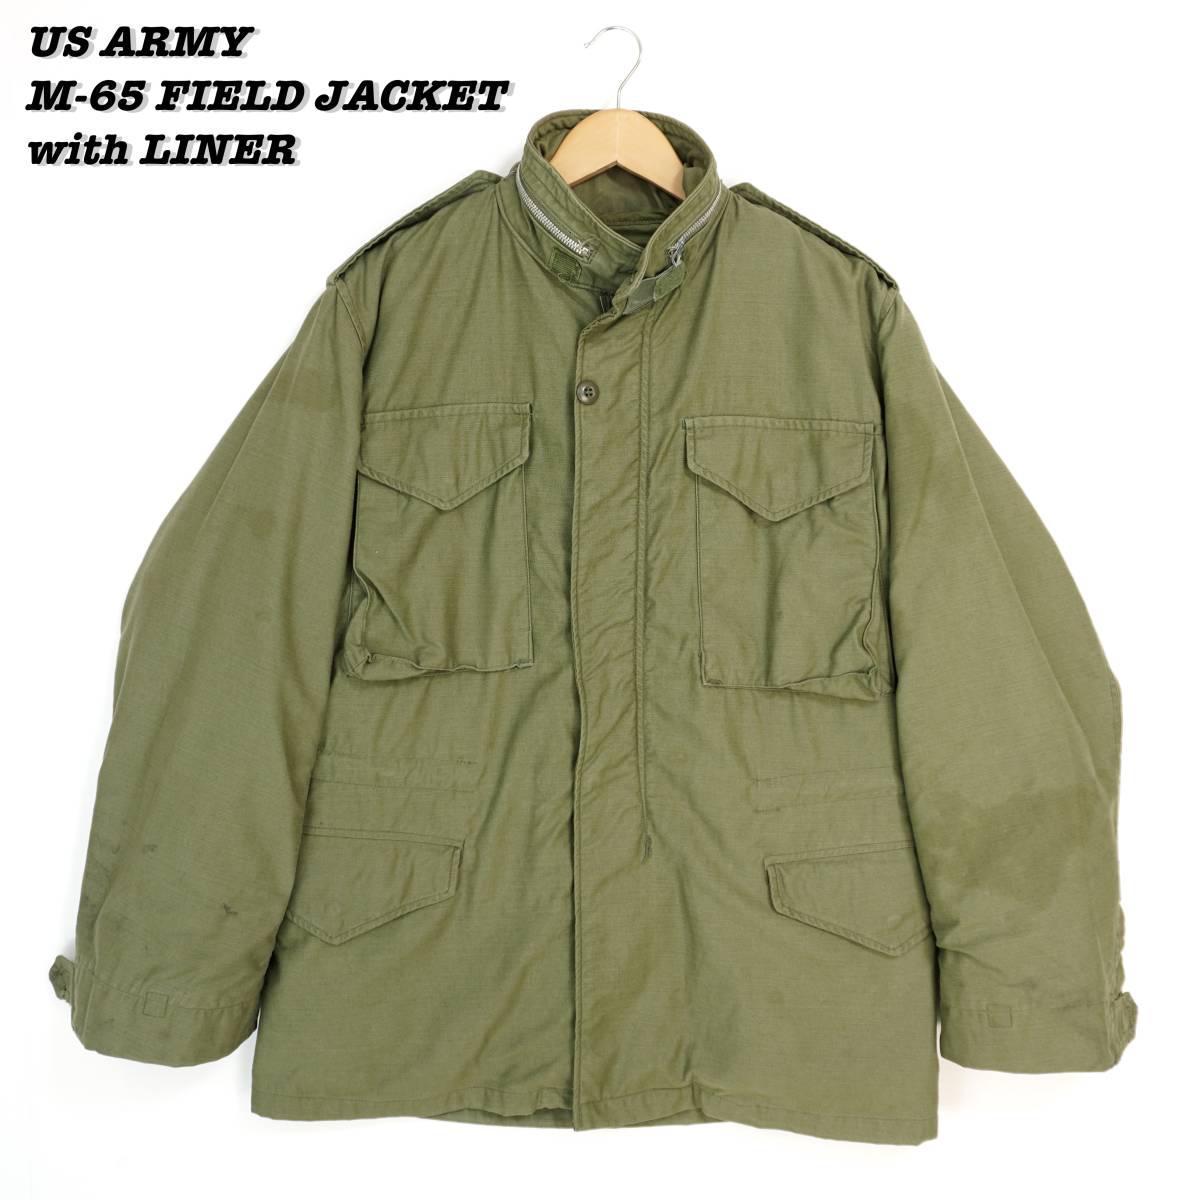 US ARMY M-65 FIELD JACKET with LINER 304221 Vintage 1960s アメリカ軍 フィールドジャケット ライナー付き 1960年代 ヴィンテージ